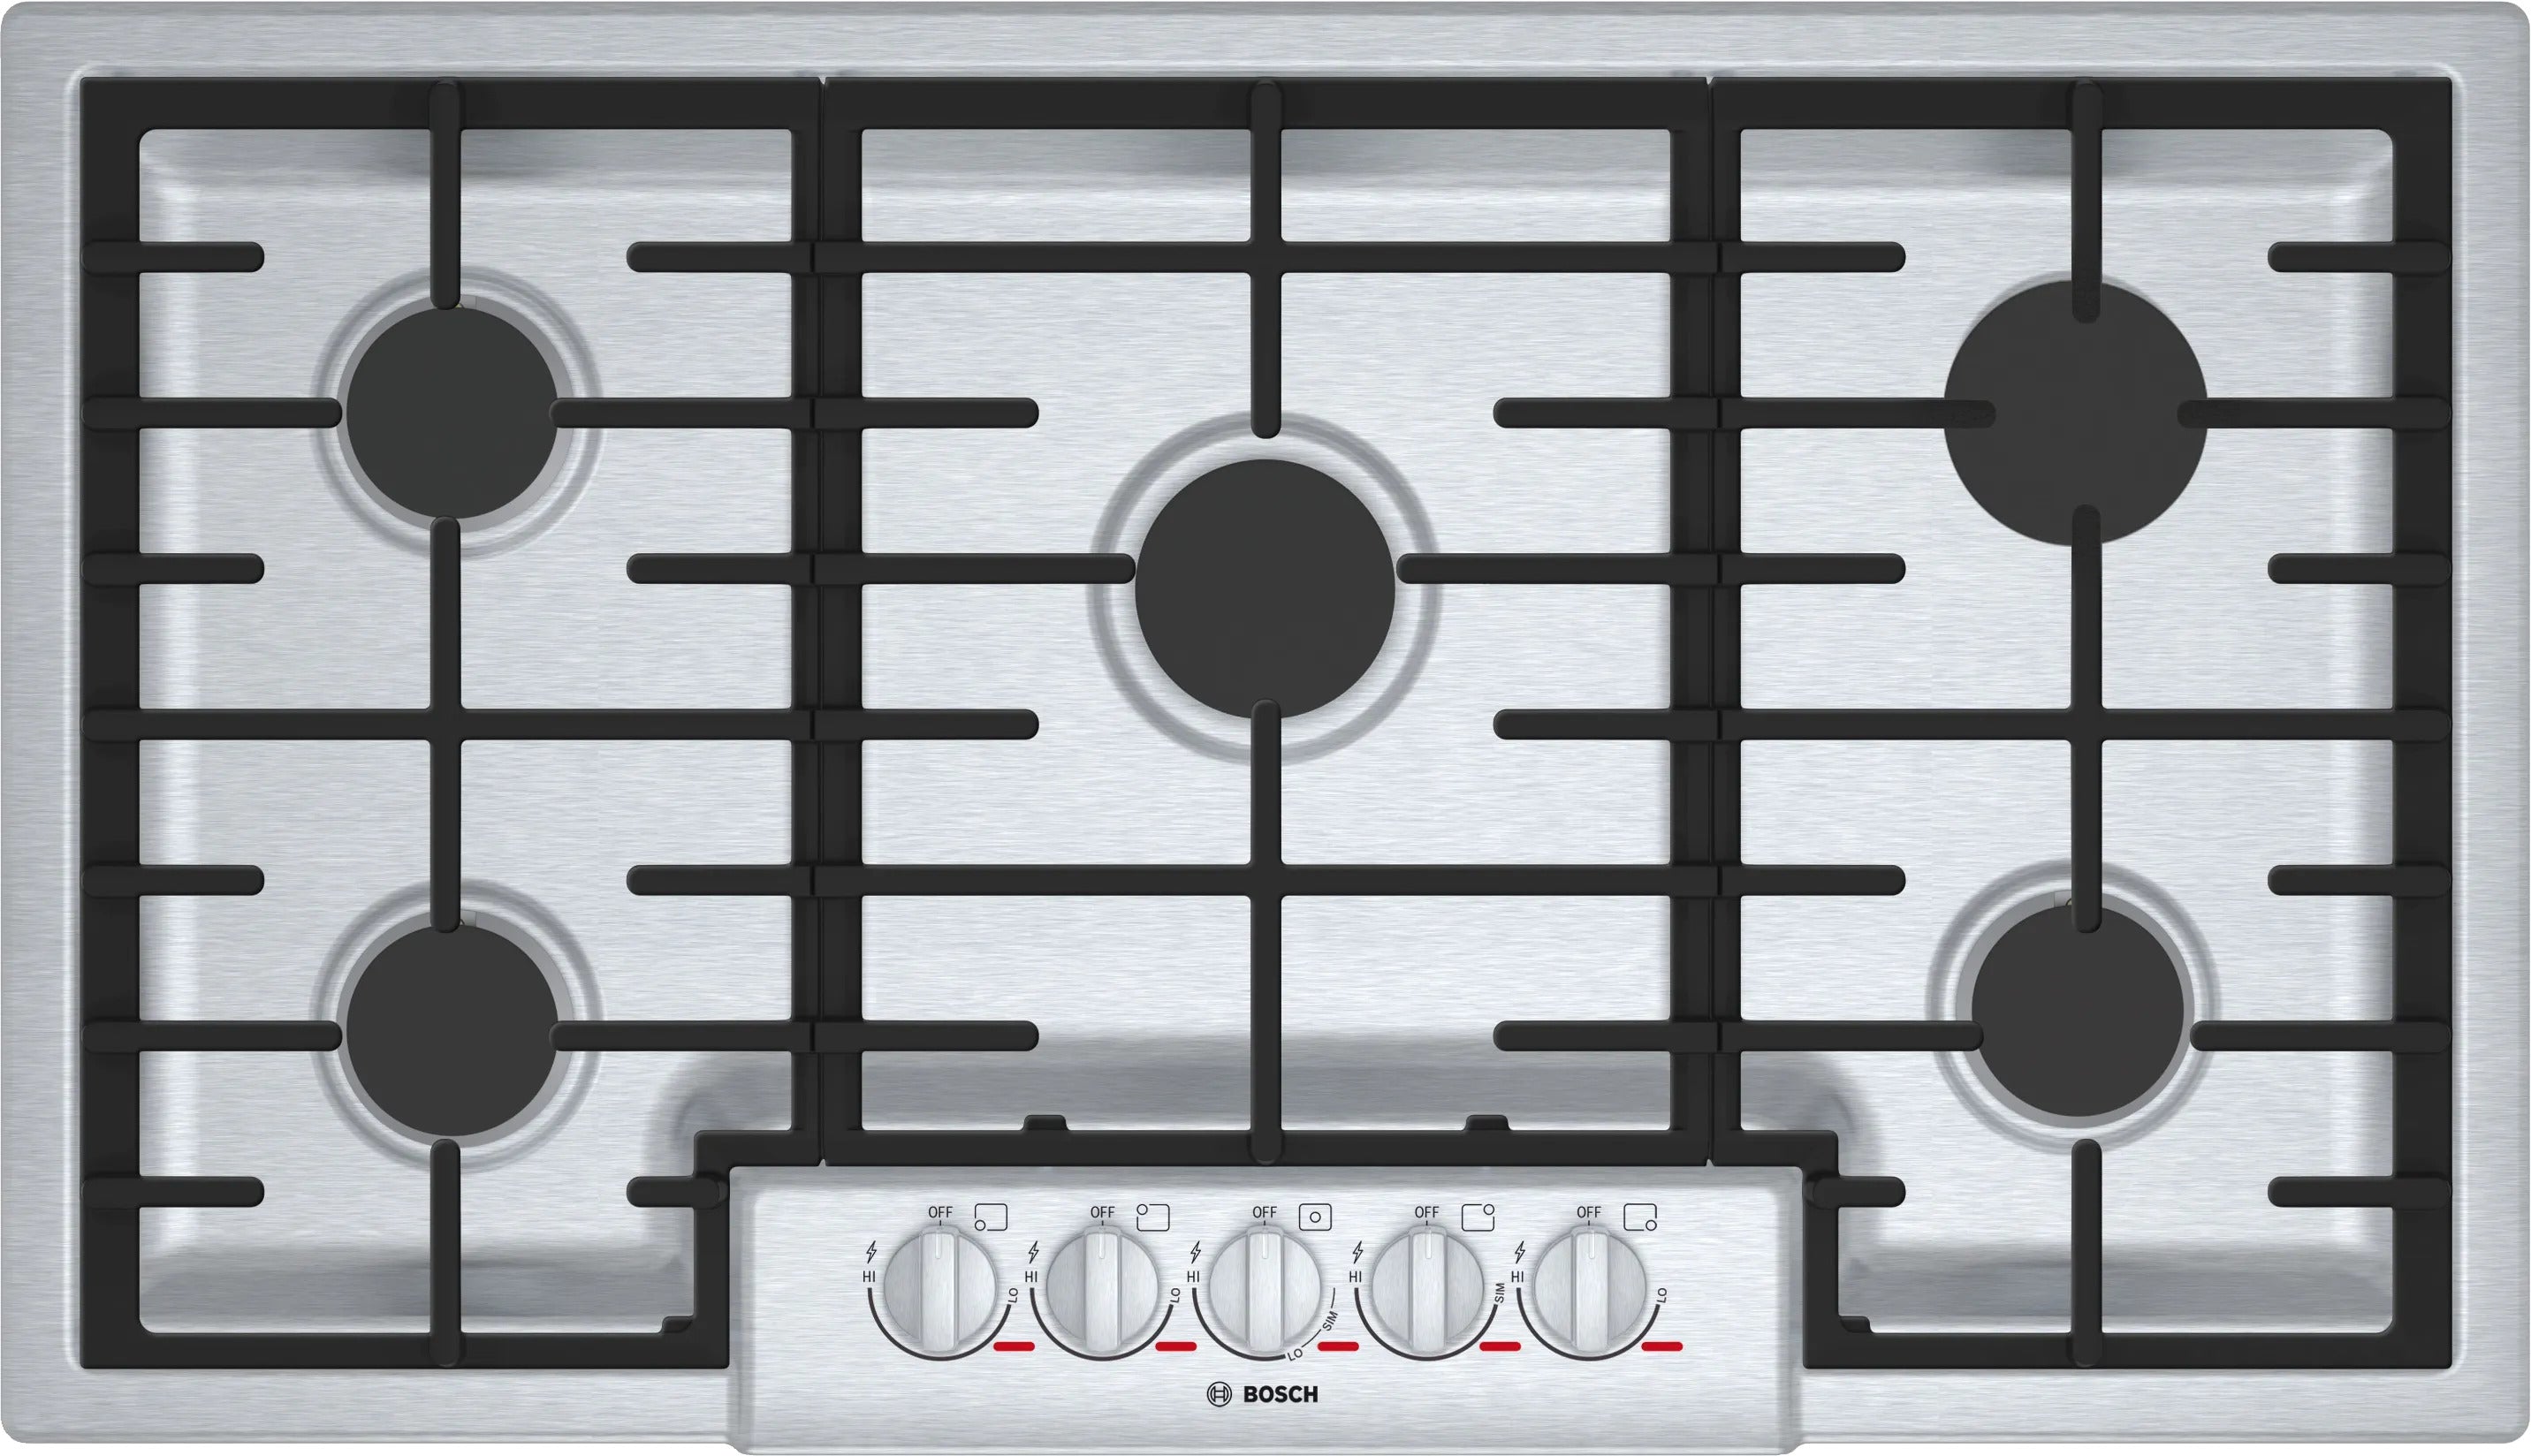 Bosch - 36 inch wide Gas Cooktop in Stainless Steel - NGMP656UC